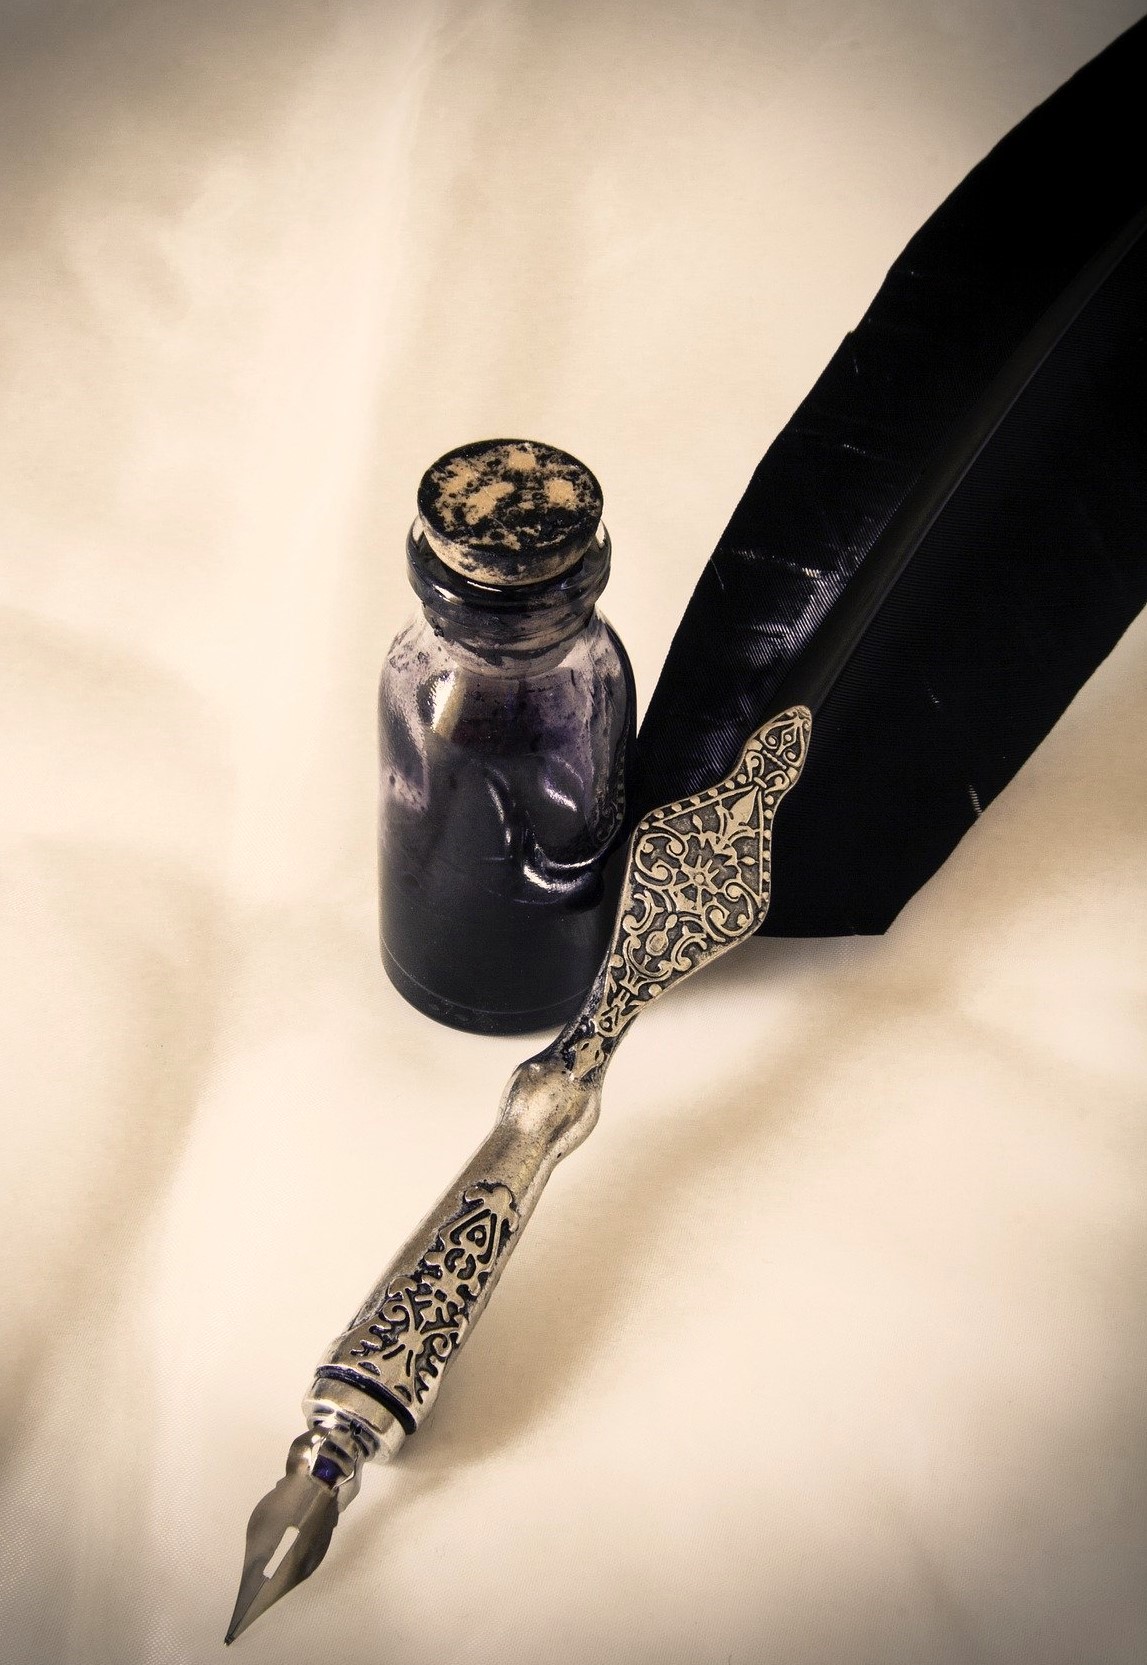 Quill with raven feather and ornate silver nib next to a small vial of ink